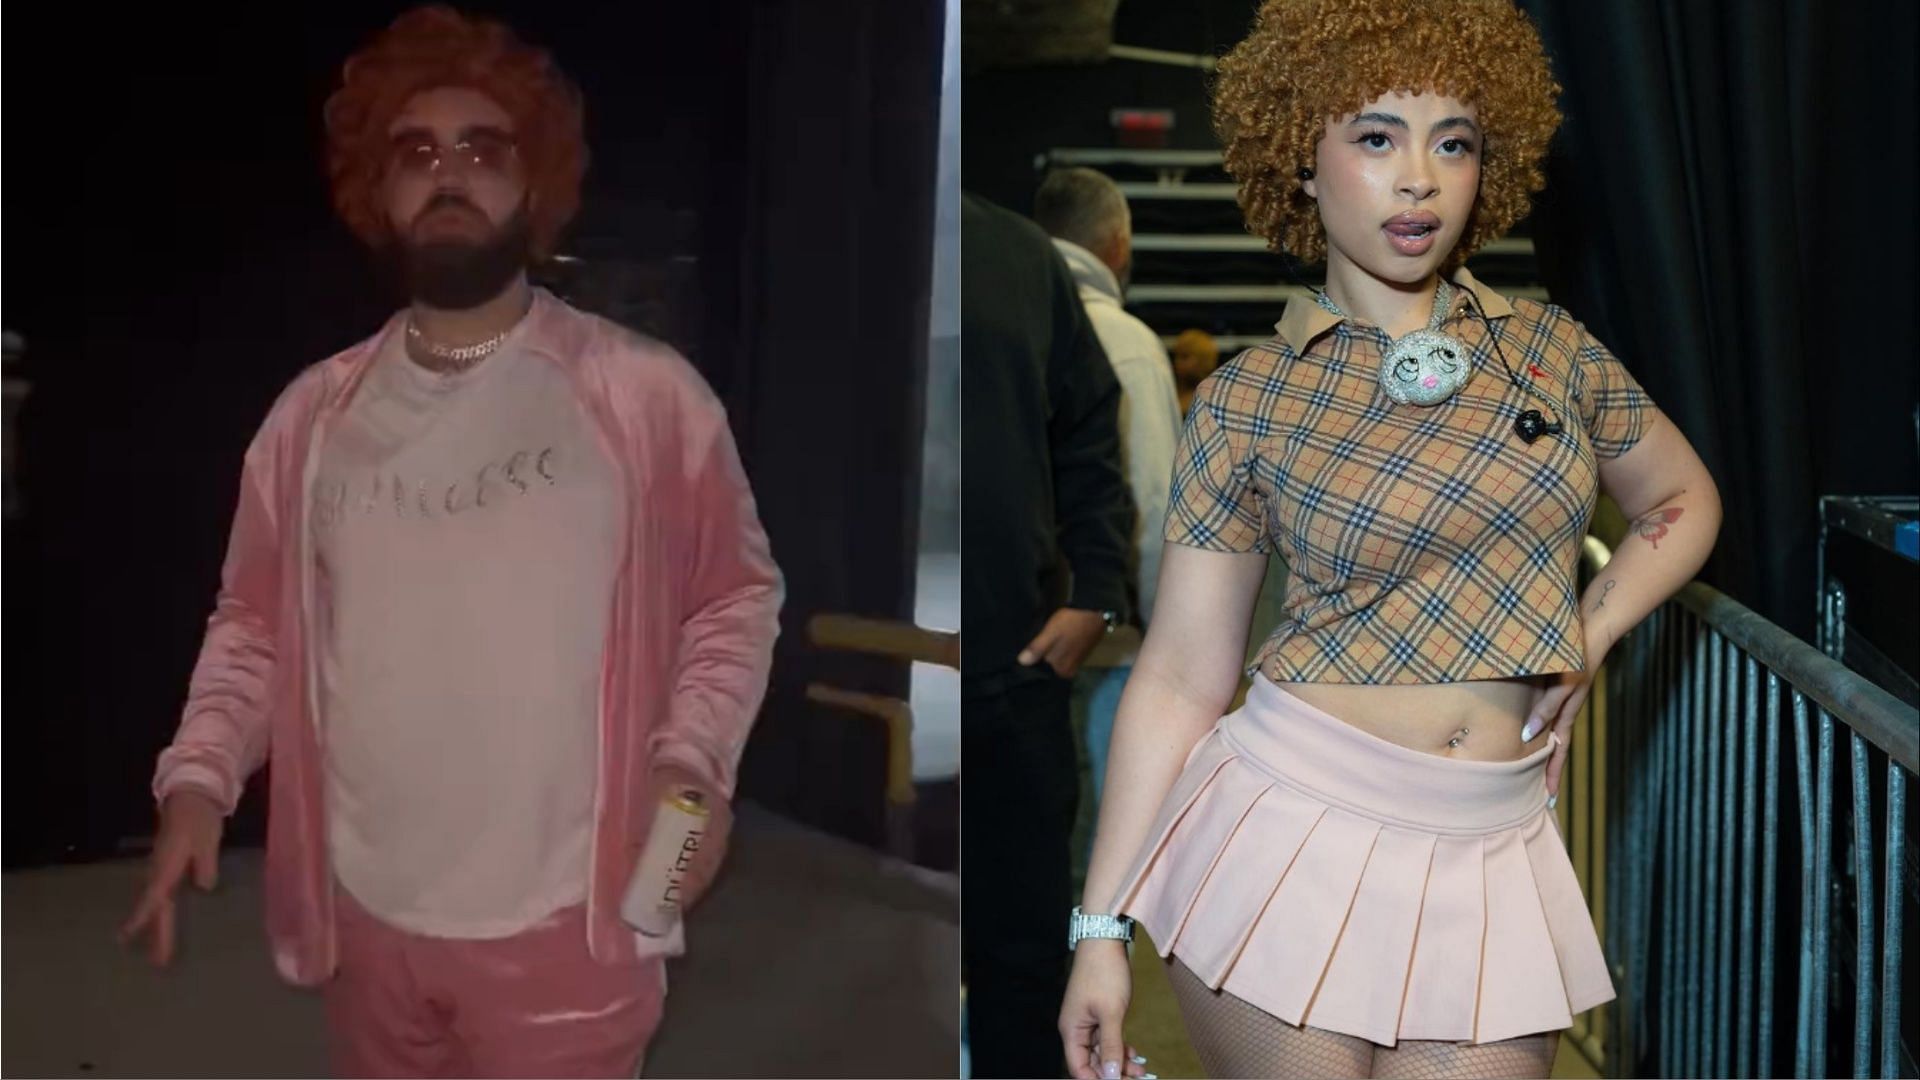 Fake claims of Drake dressing up as Ice Spice for Halloween go viral (Image via NATERERUN/X and icespice/Instagram)